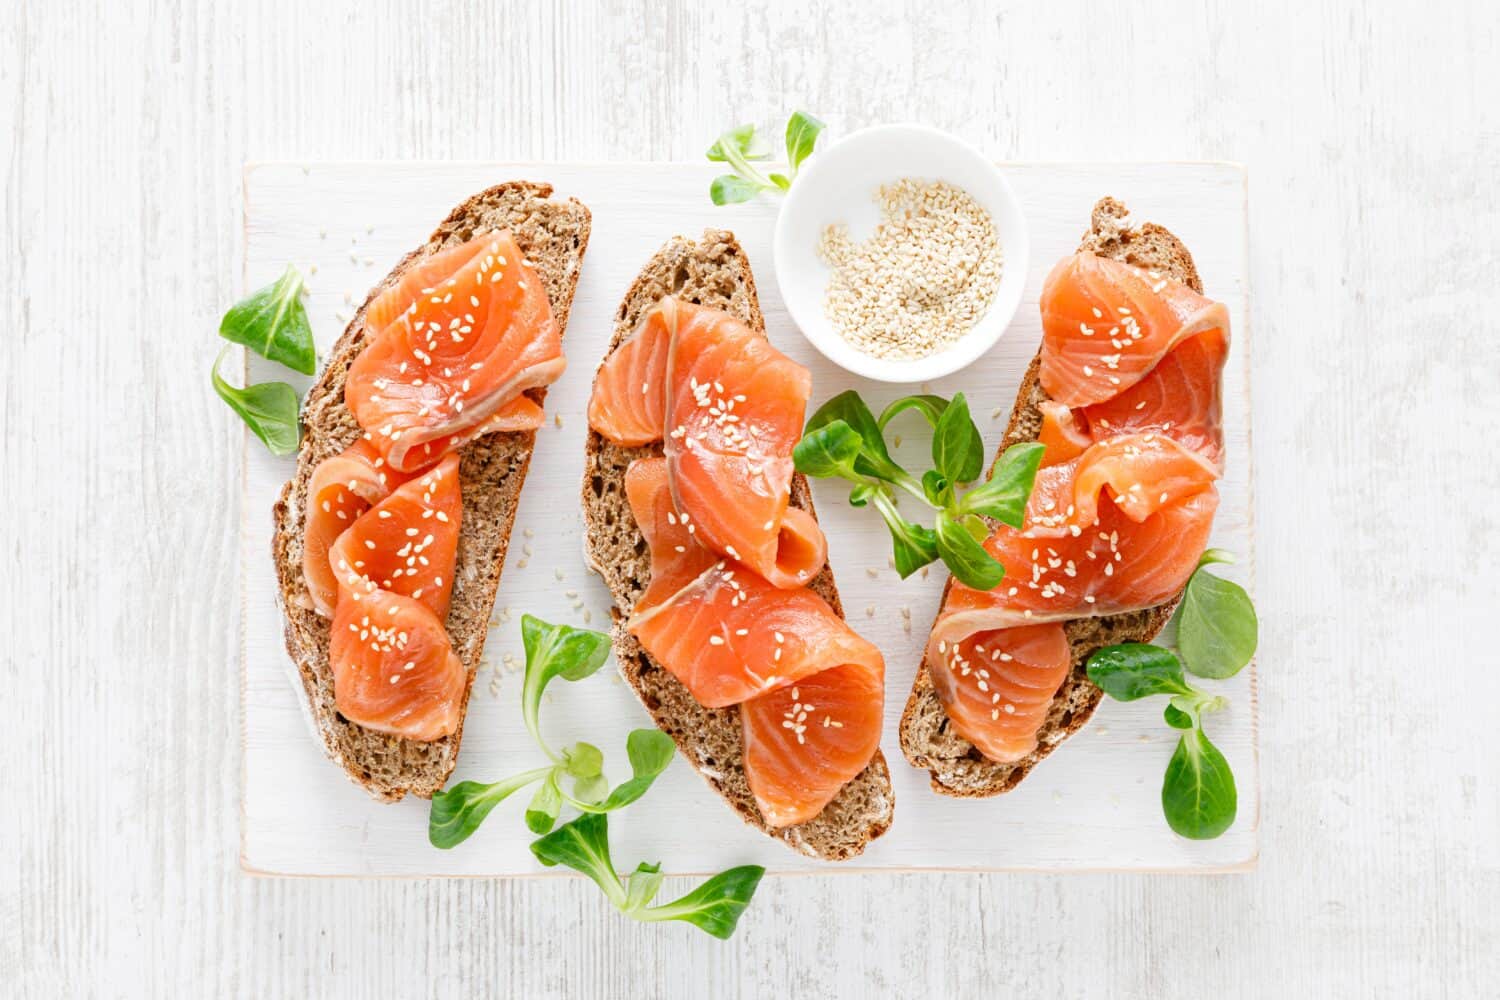 Whole grain rye bread open sandwiches with salted salmon on a white rustic wooden table. Healthy food. Top view